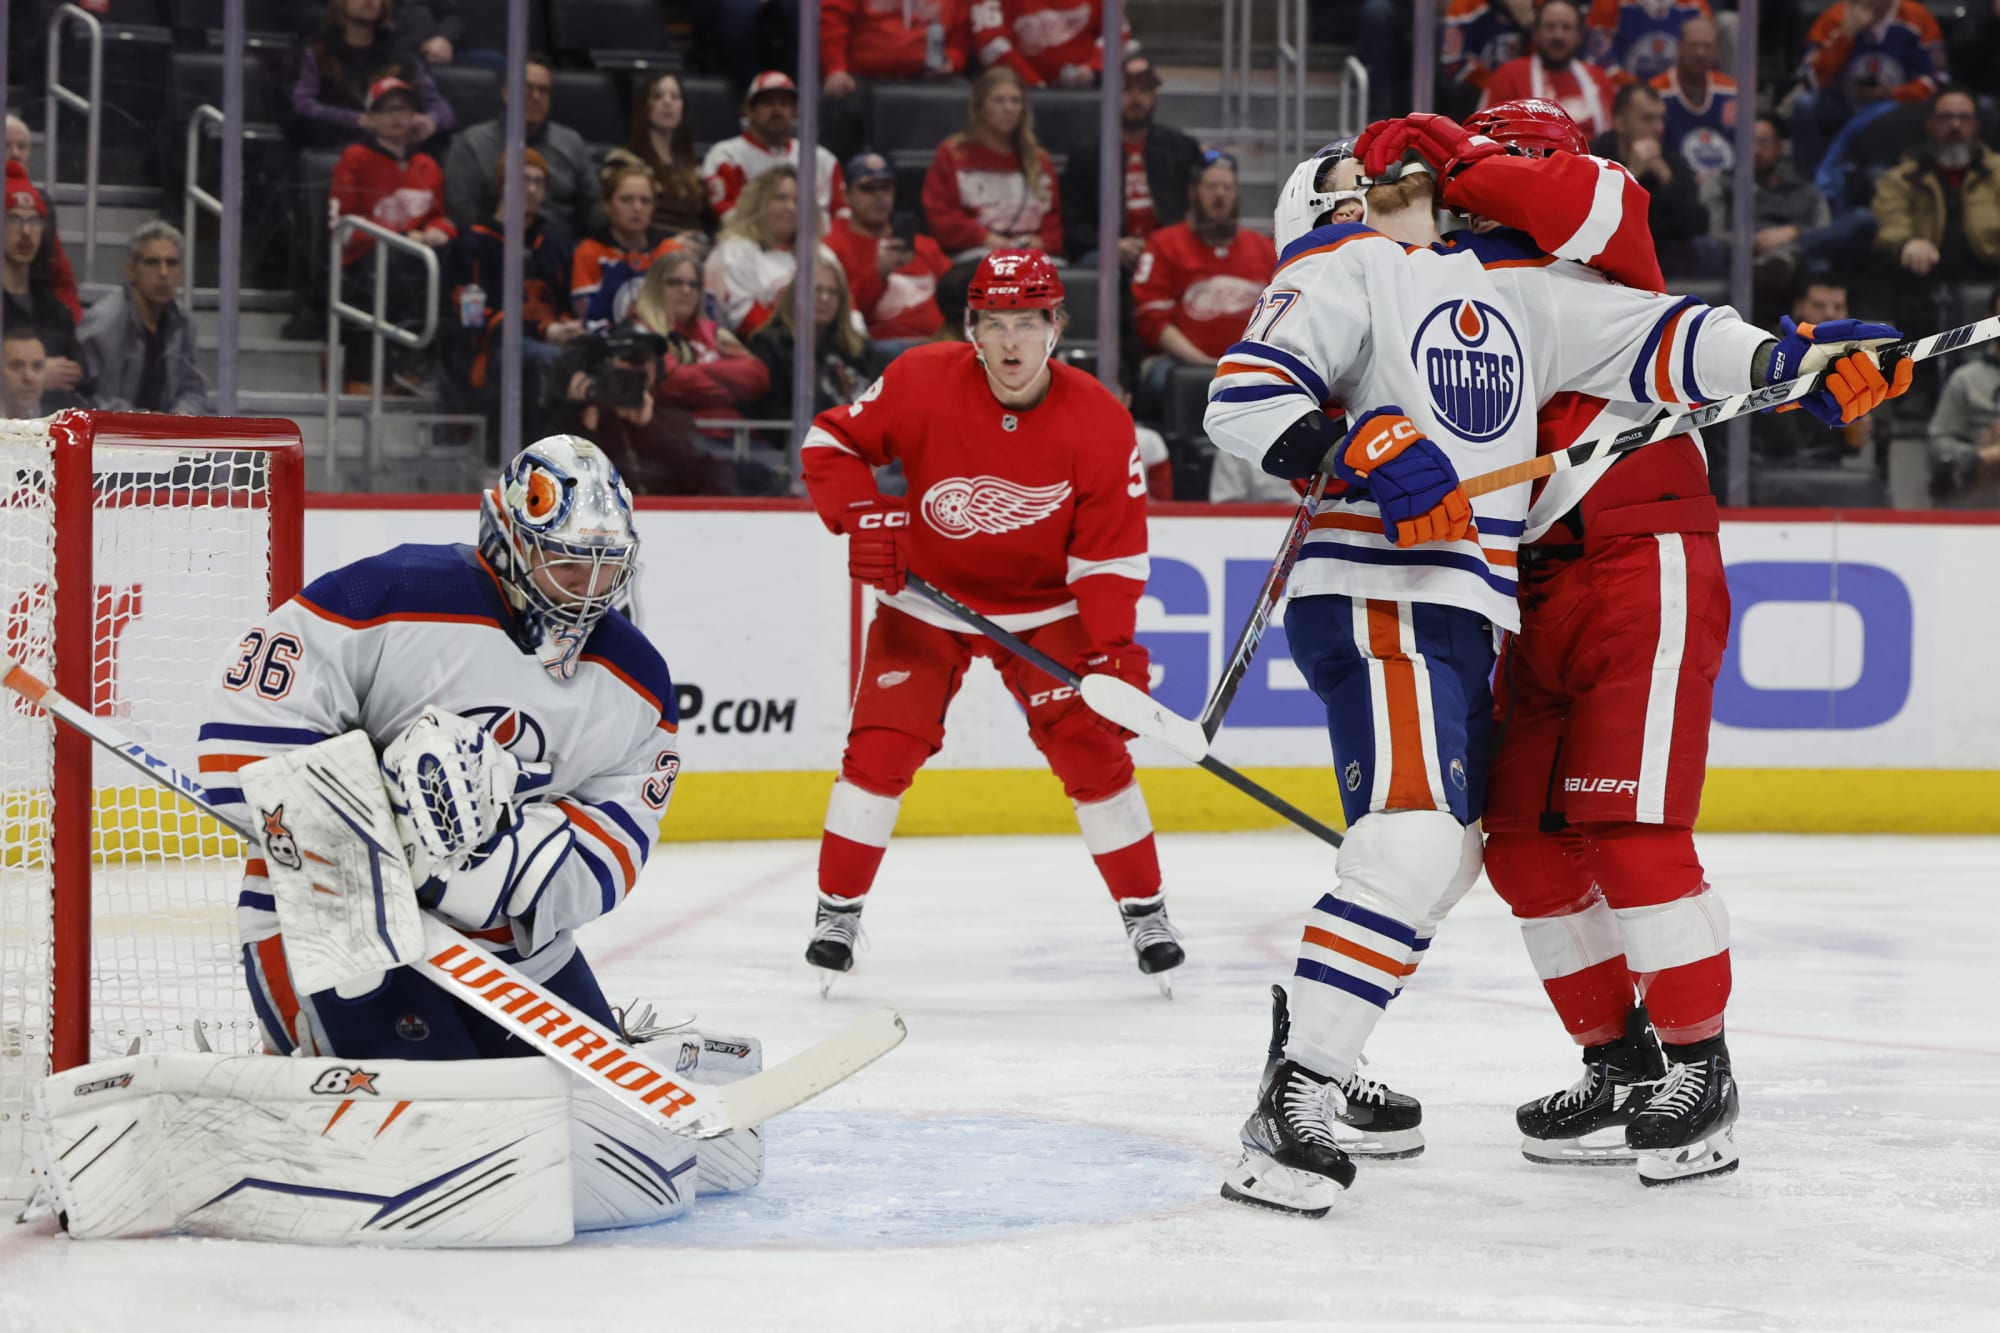 Detroit Red Wings fall to Oilers 5-2 in physical contest